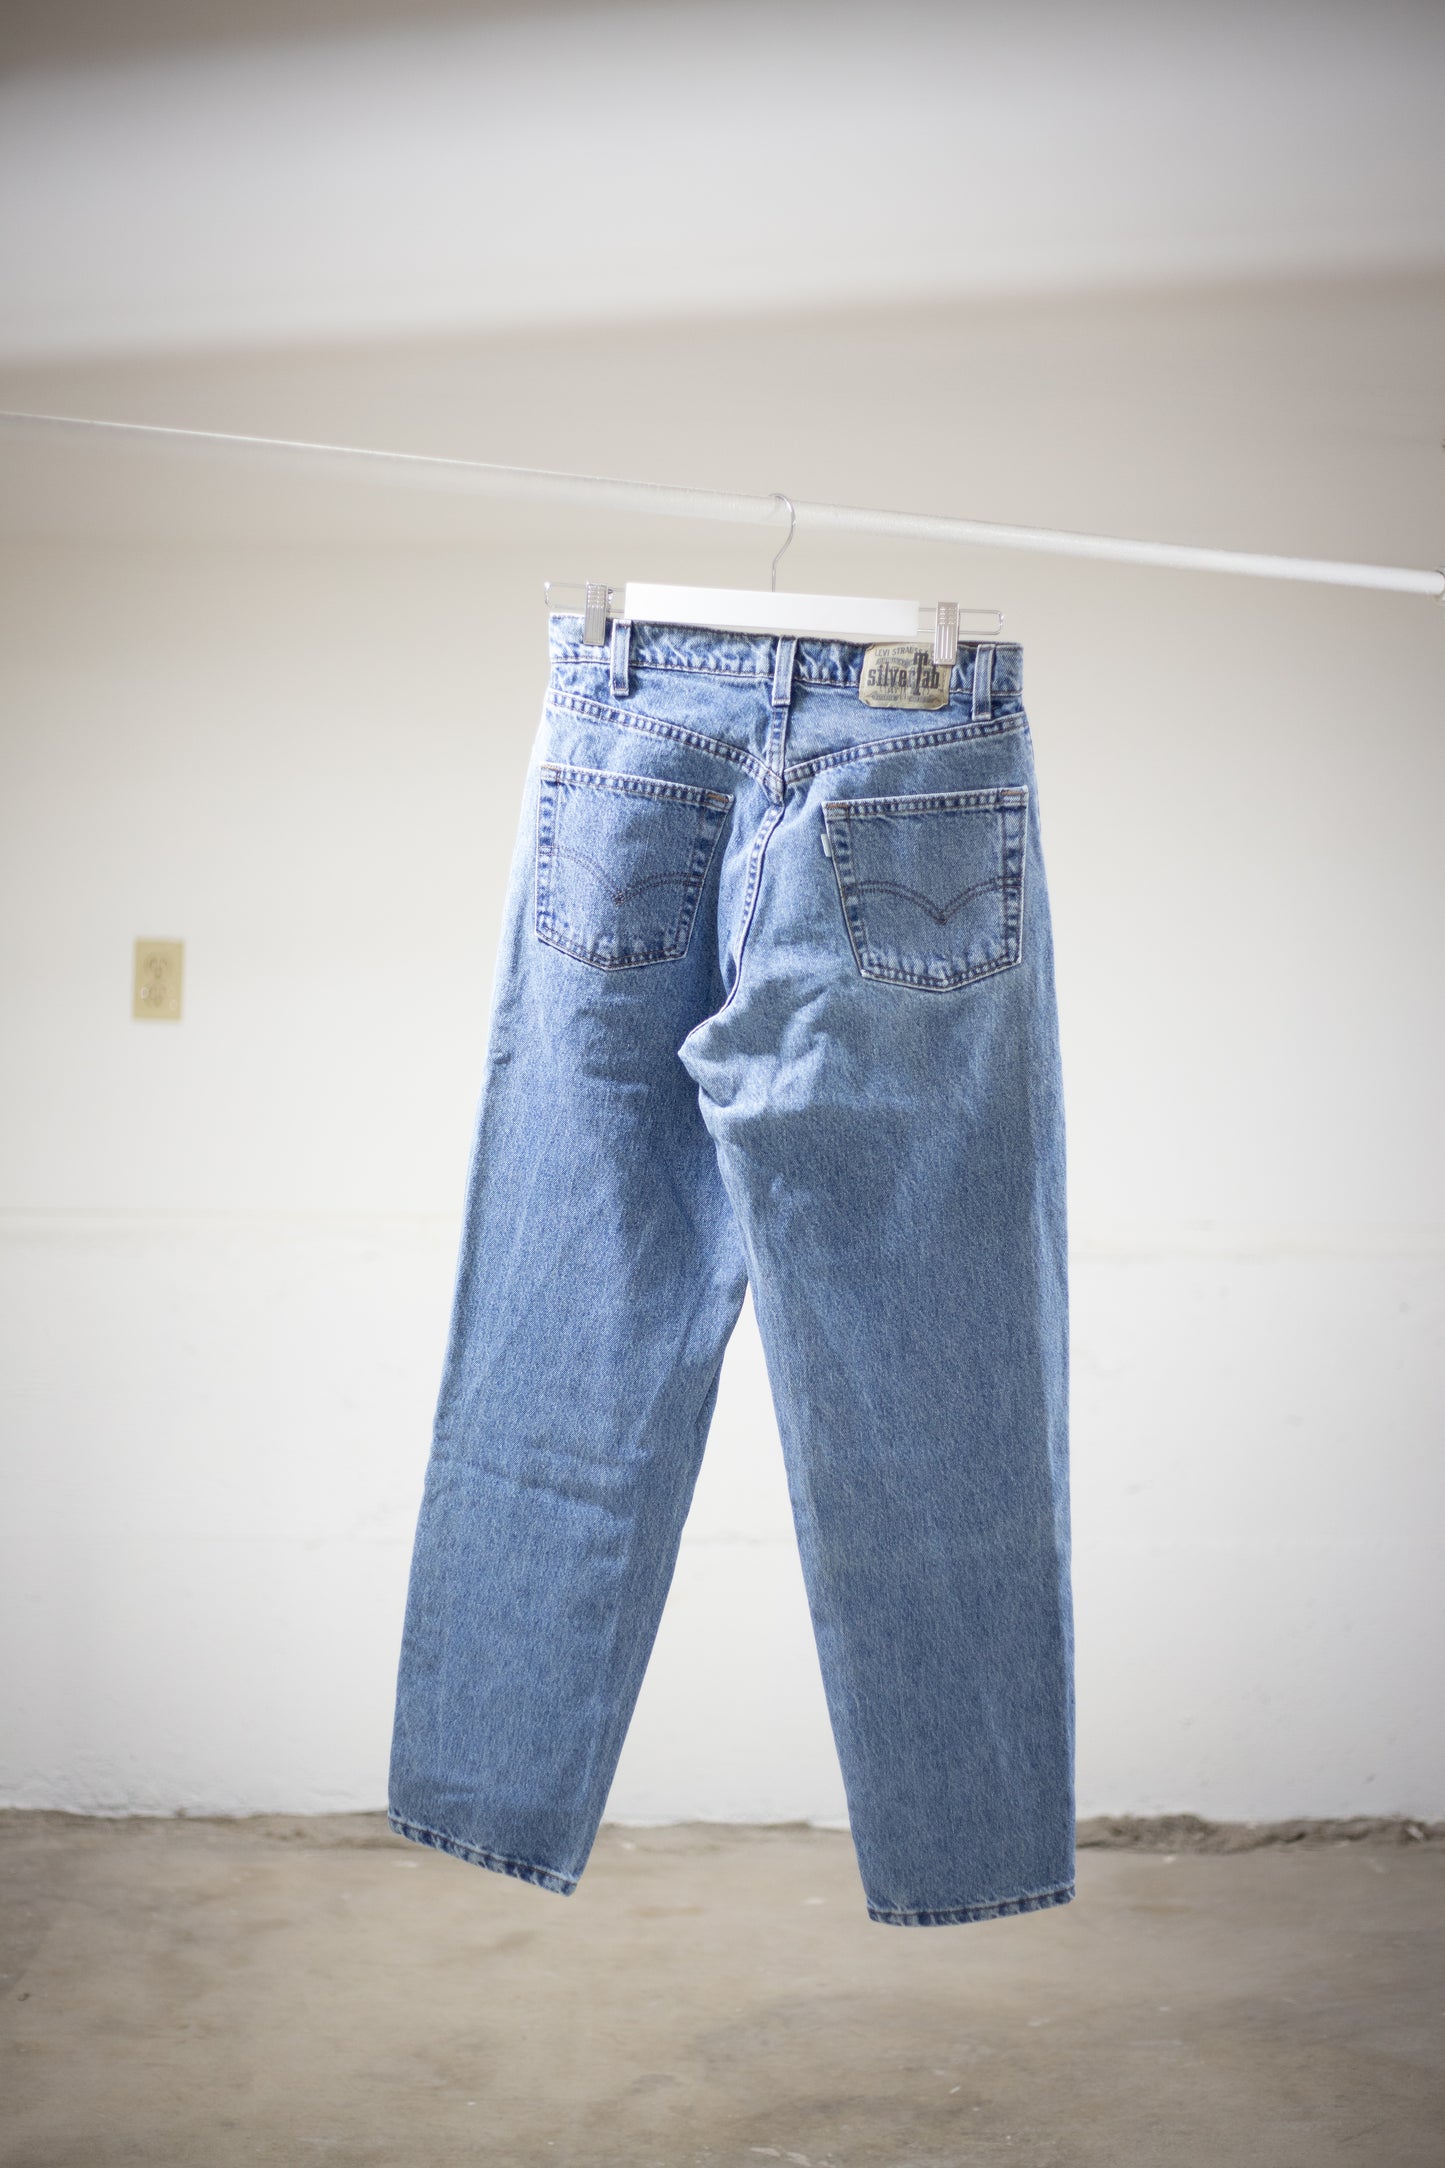 90's Levi's SilverTab (513 0195) Loose Jeans